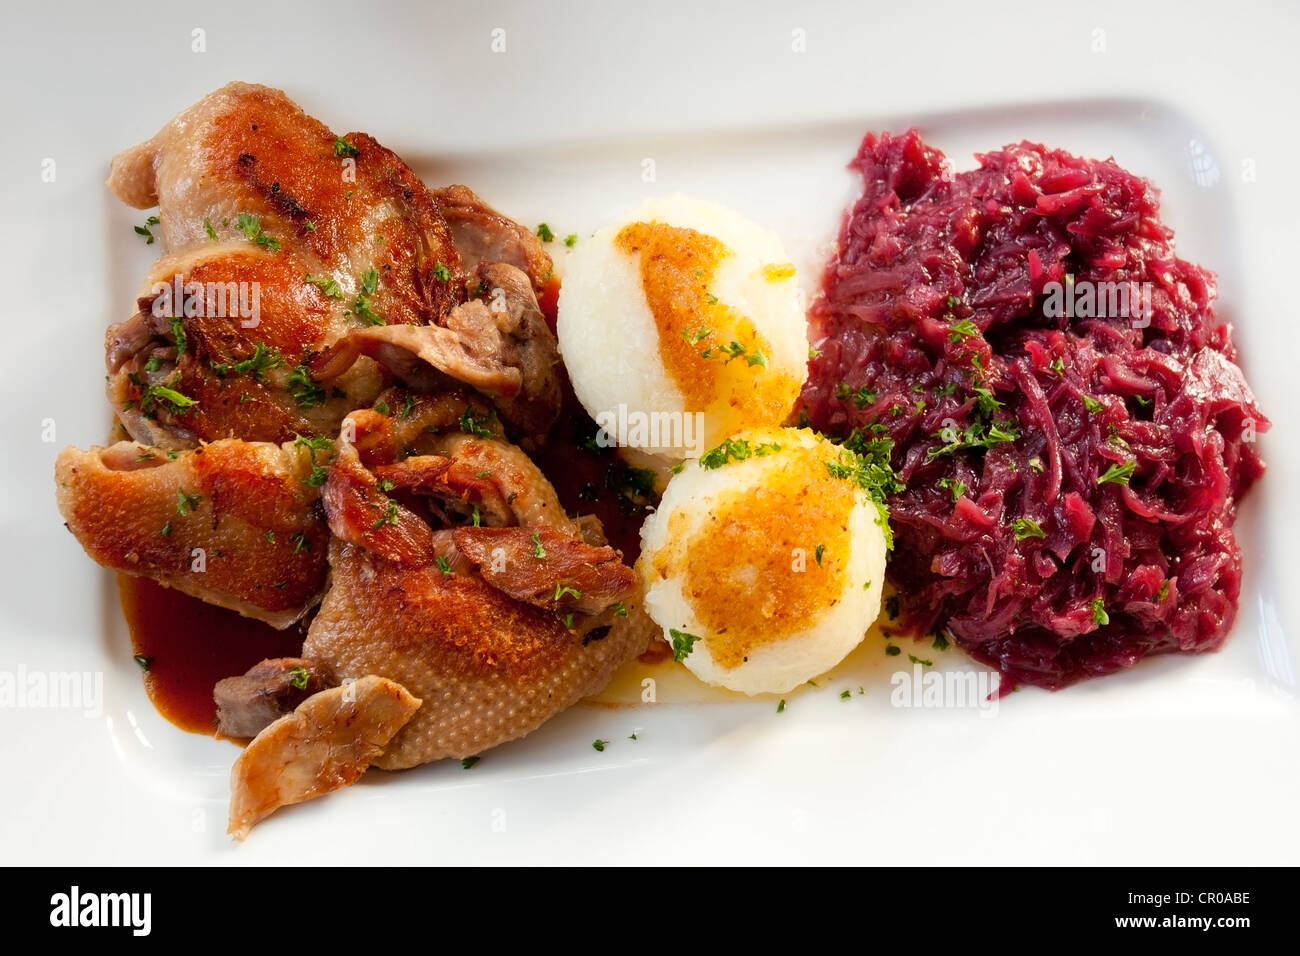 Half a roast duck with potato dumplings and red cabbage Stock Photo